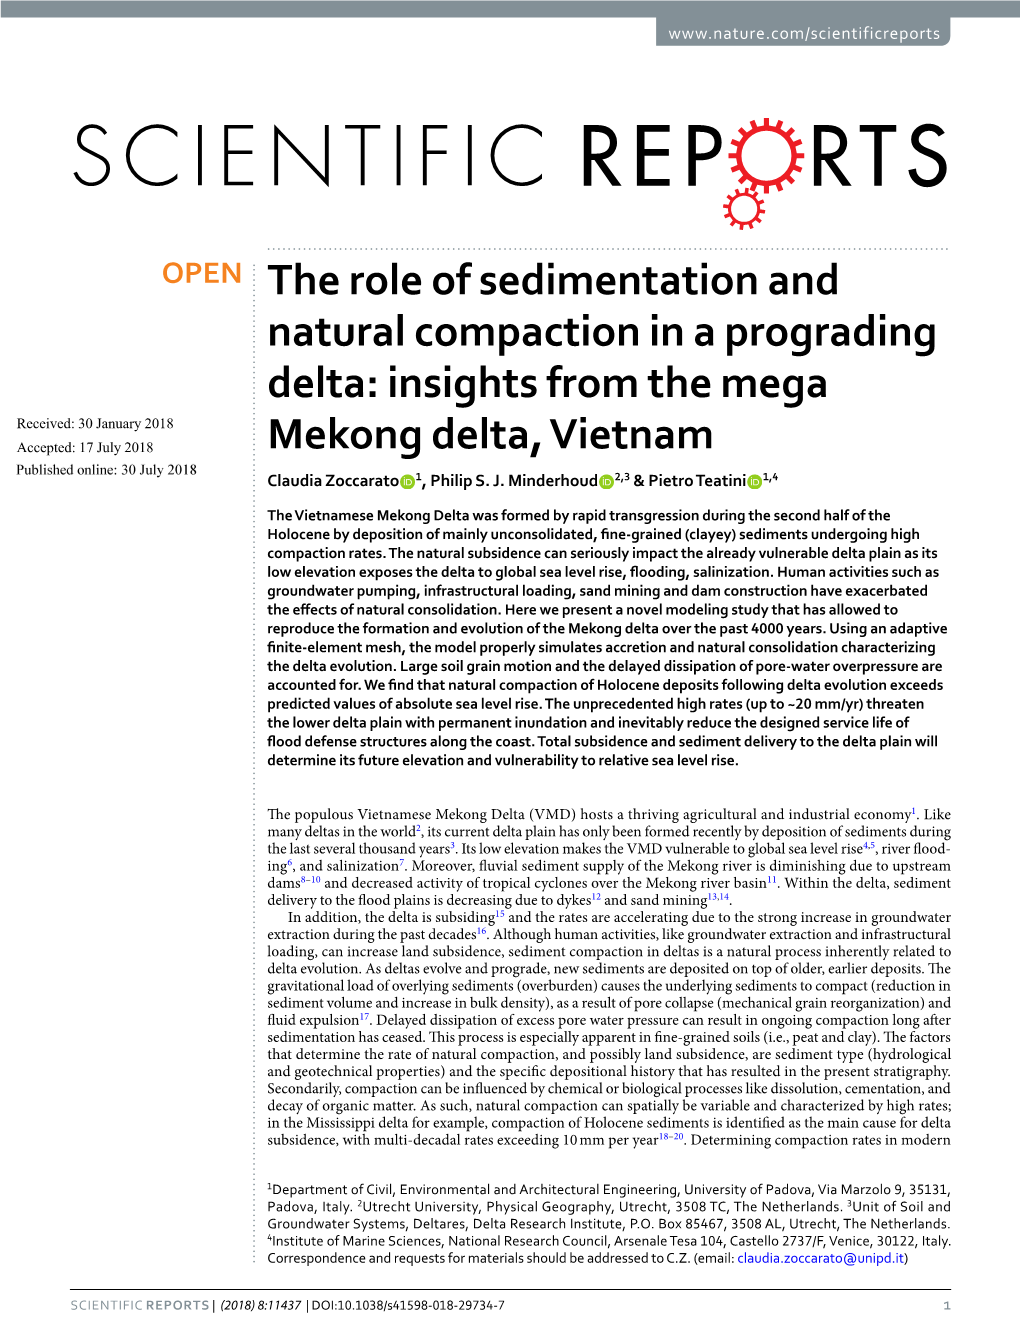 The Role of Sedimentation and Natural Compaction in a Prograding Delta